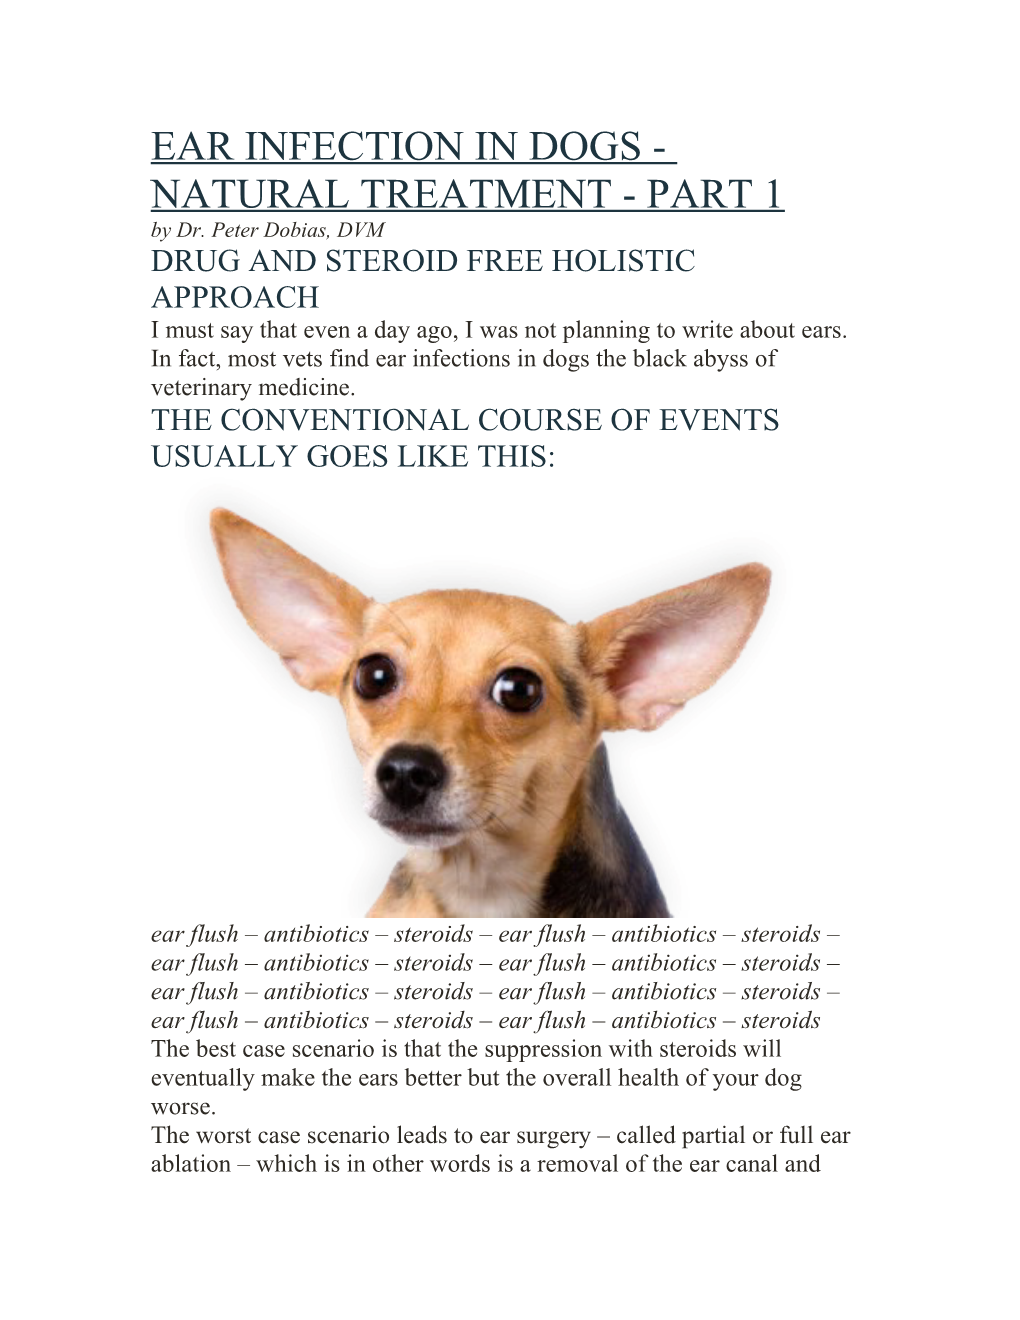 Ear Infection in Dogs - Natural Treatment - Part 1